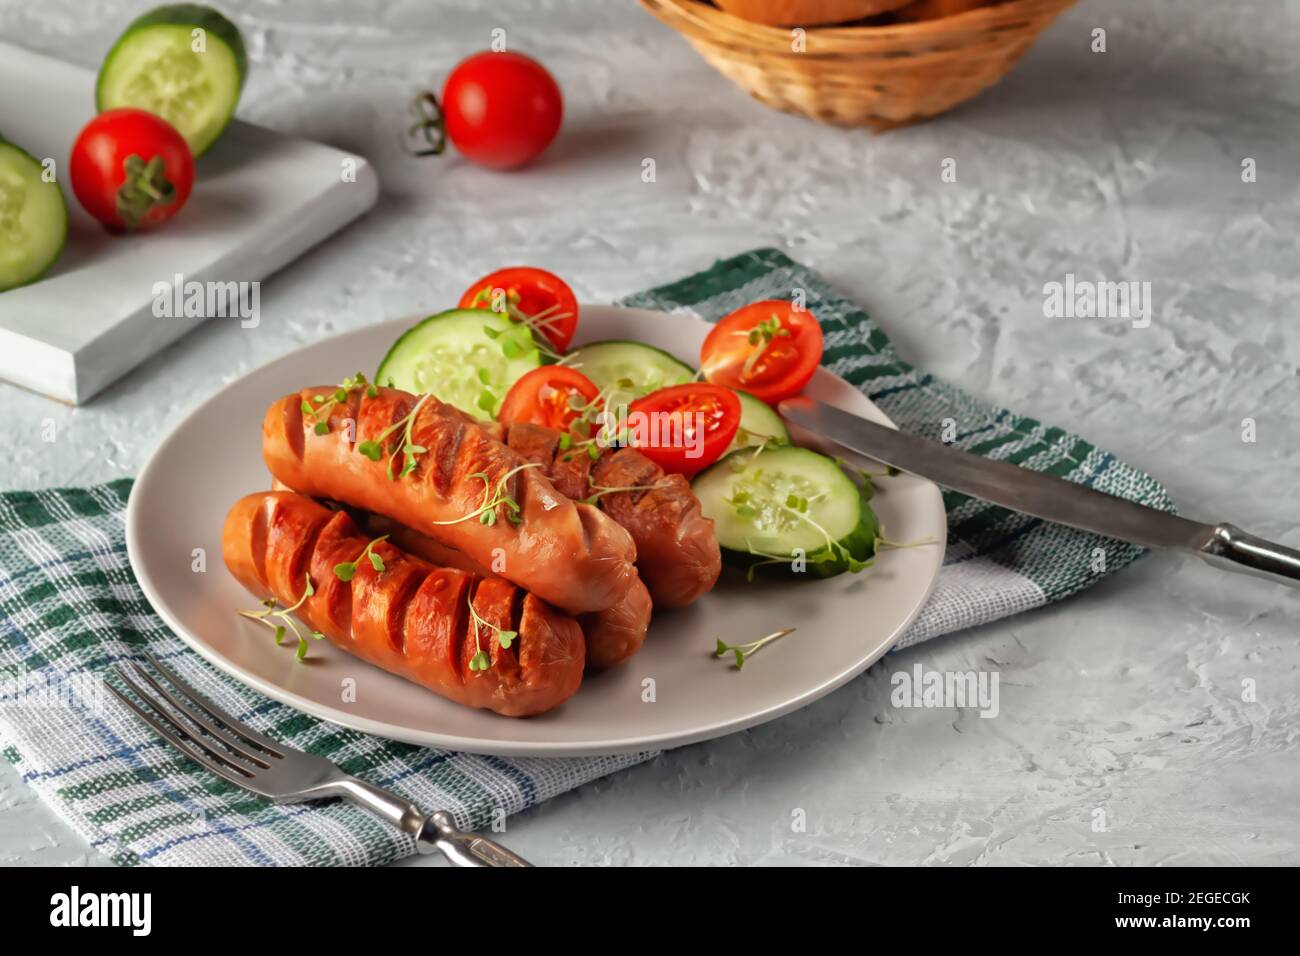 Grilled sausages with fresh vegetables are on the platter Stock Photo